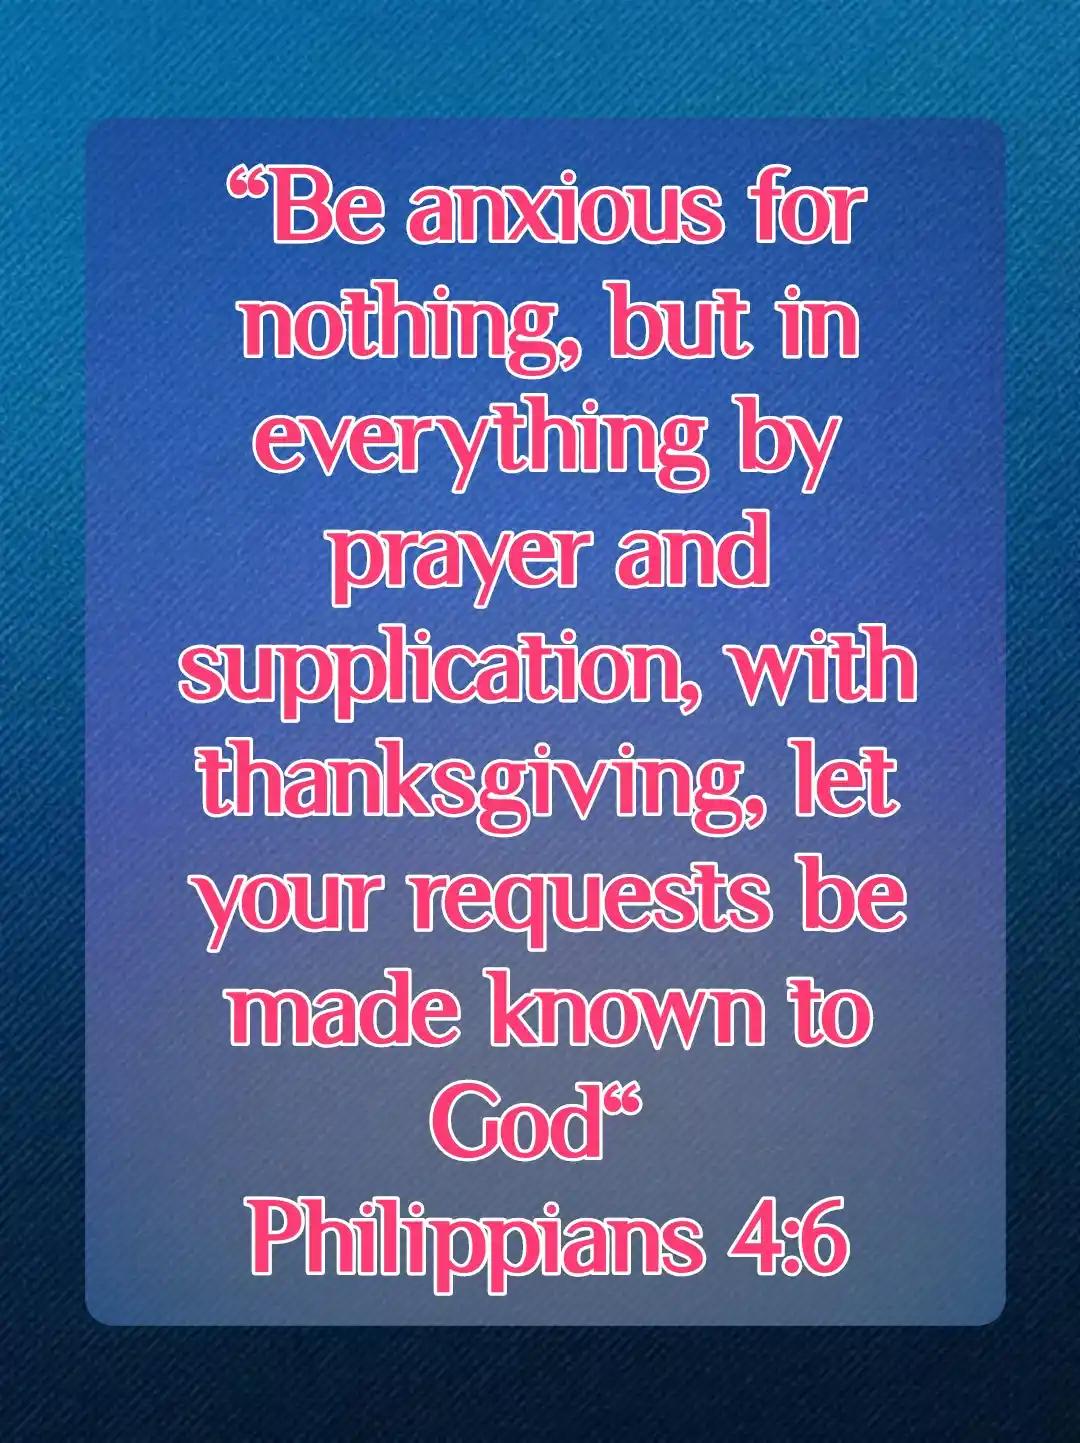 Bible Verses For Every Situation (Philippians 4:6)